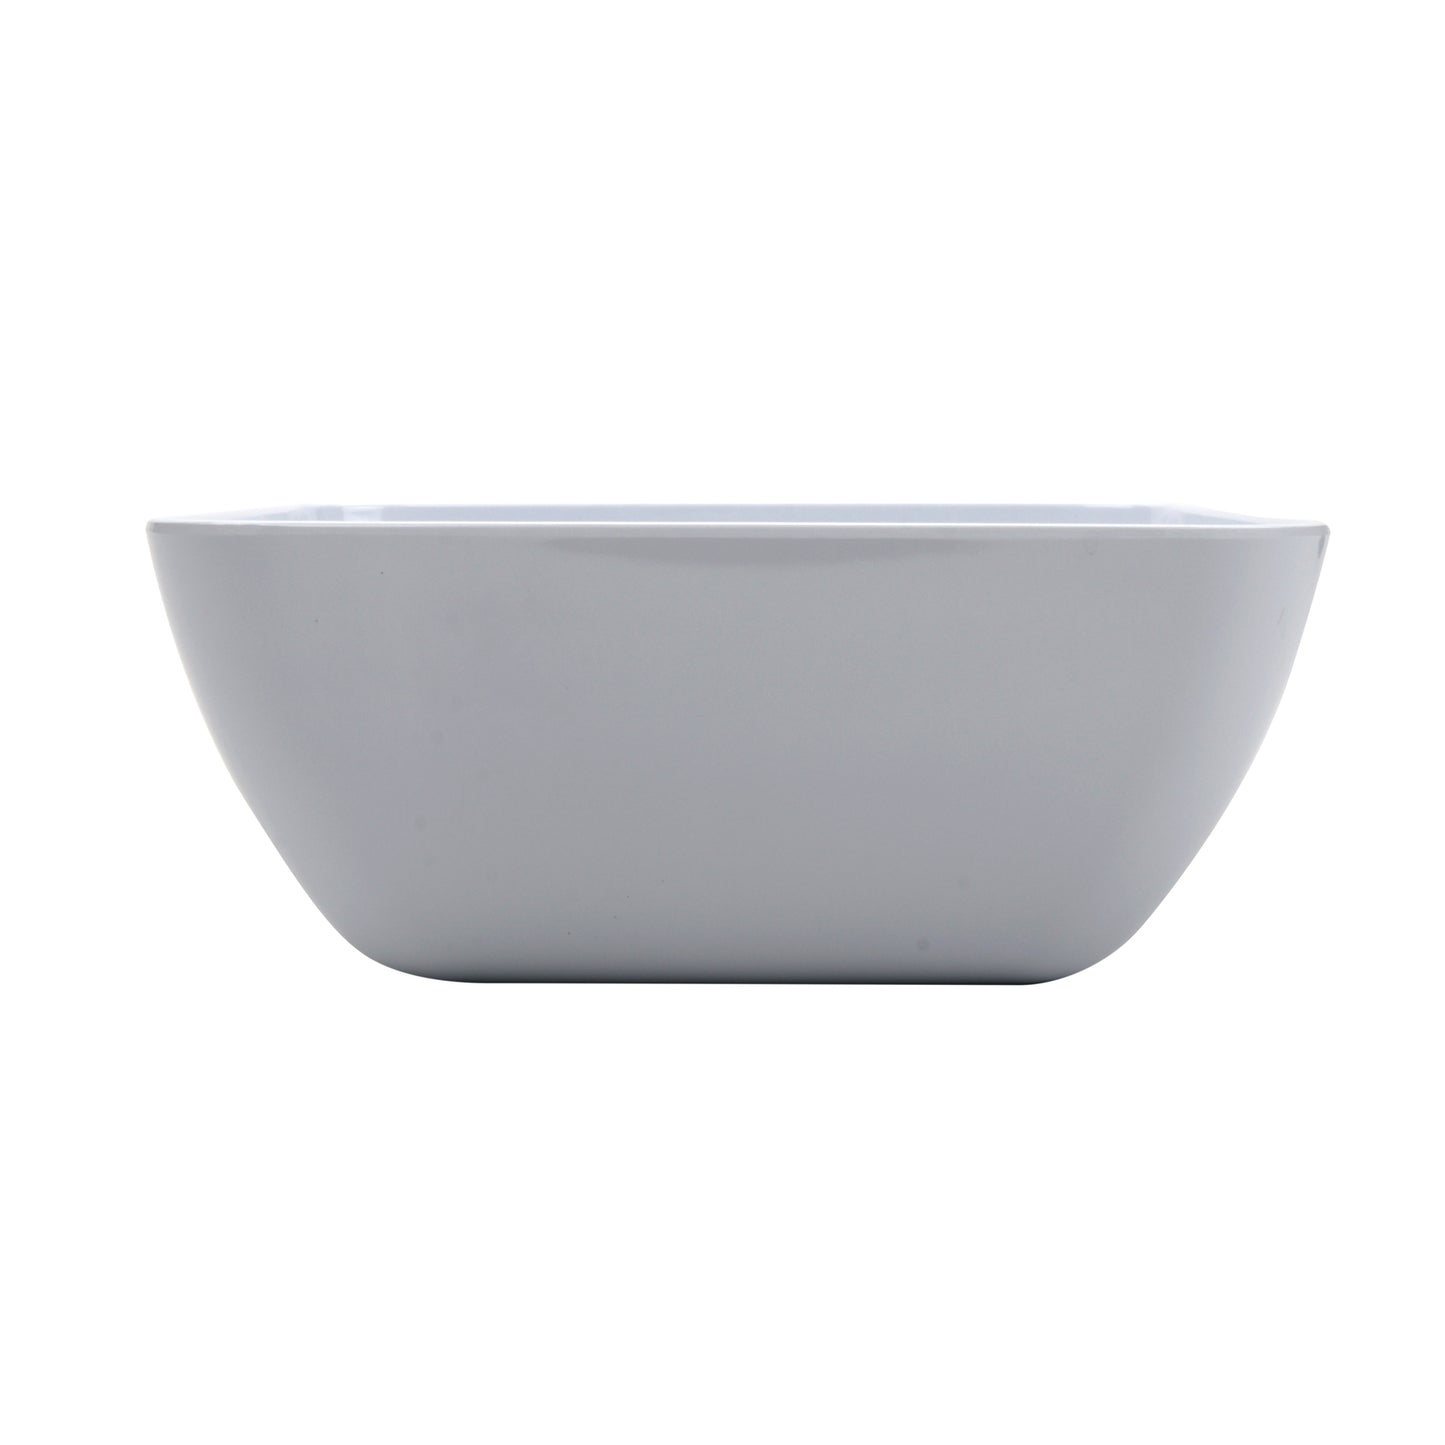 12 oz. Melamine, White, Square Soup, Salad, Pasta Nappie Bowl with Rounded Corners, (12.5 oz. rim-full), 2" Deep, G.E.T. Midtown (12 Pack)